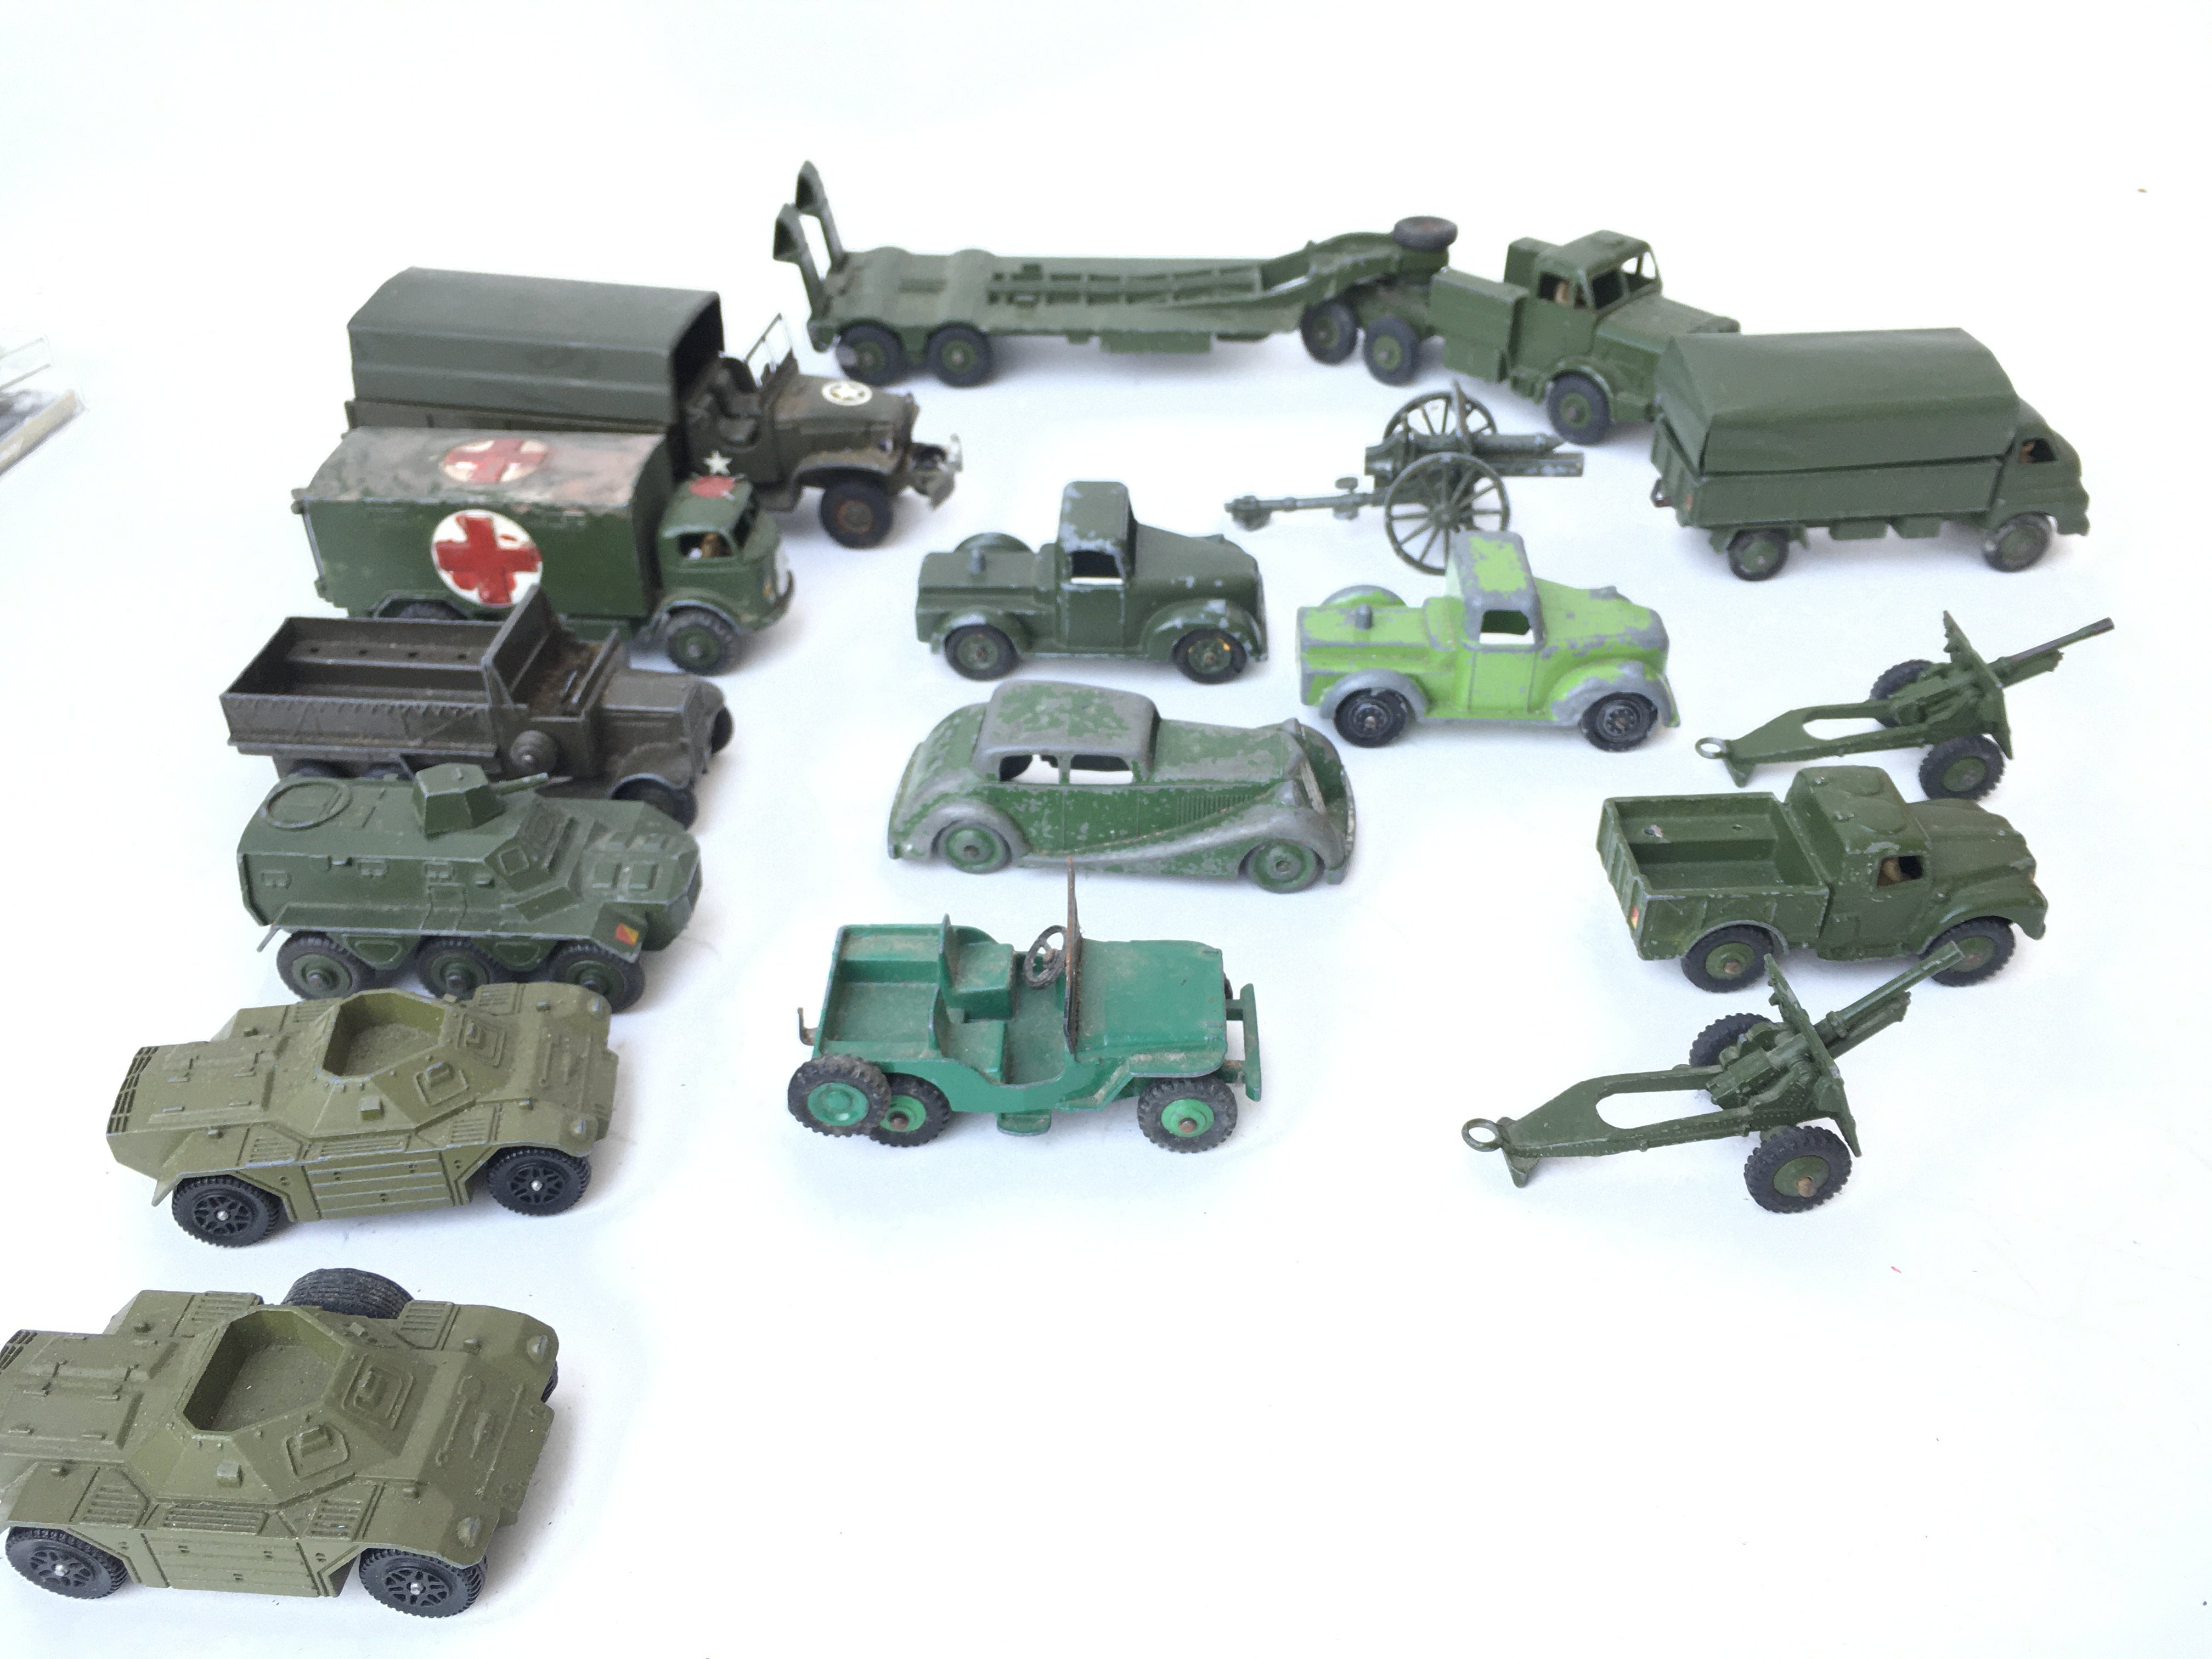 A Box Containing a Collection of Military Vehicles